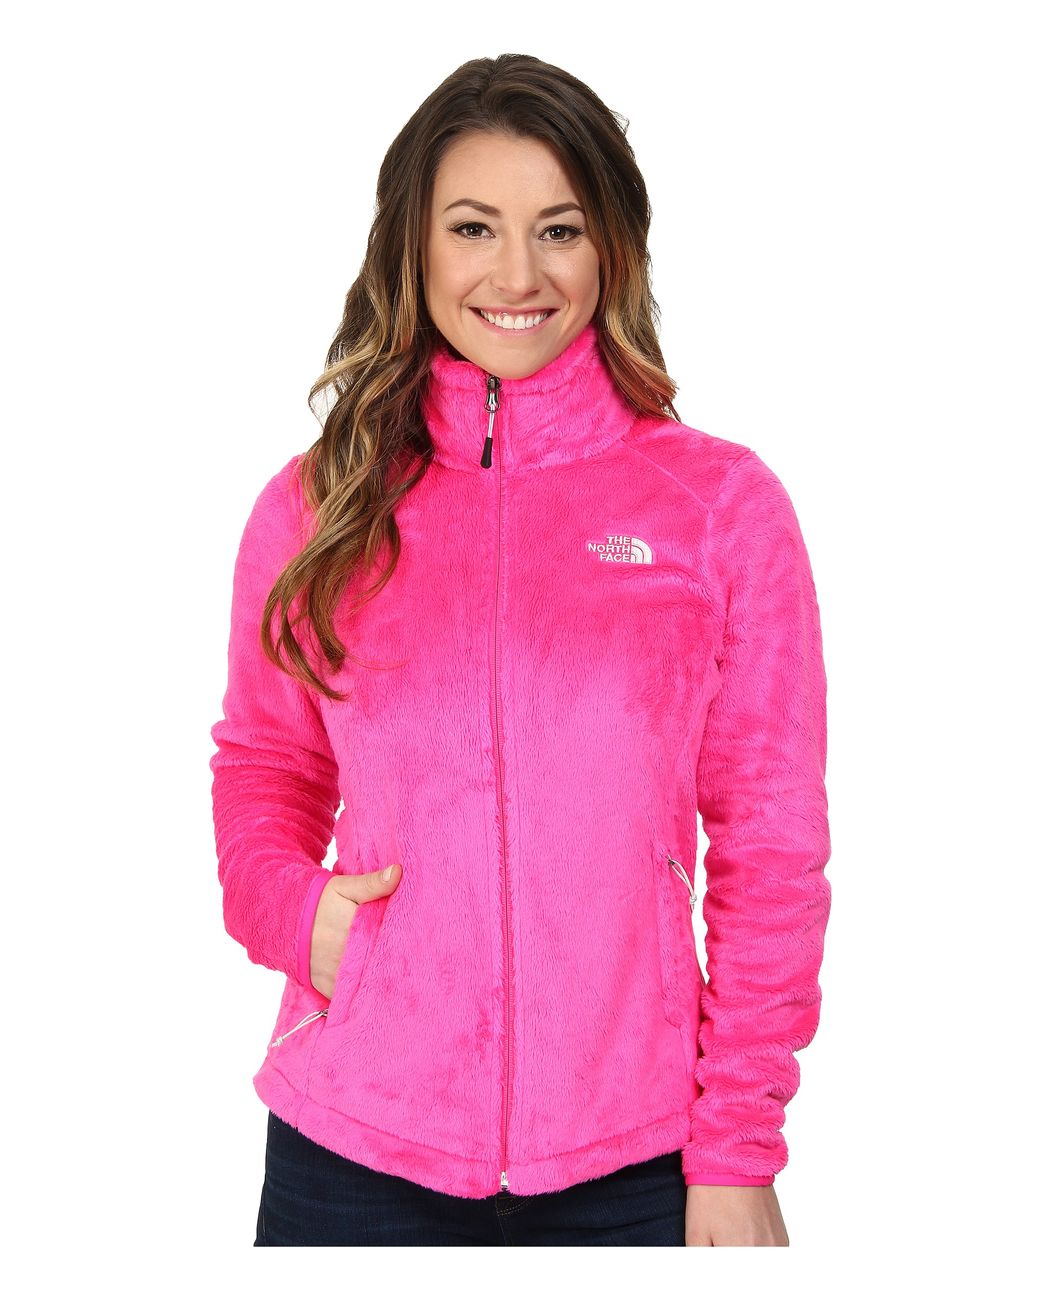 https://cdna.lystit.com/1040/1300/n/photos/b924-2015/01/24/the-north-face-pink-osito-2-jacket-product-1-27296068-1-992103805-normal.jpeg